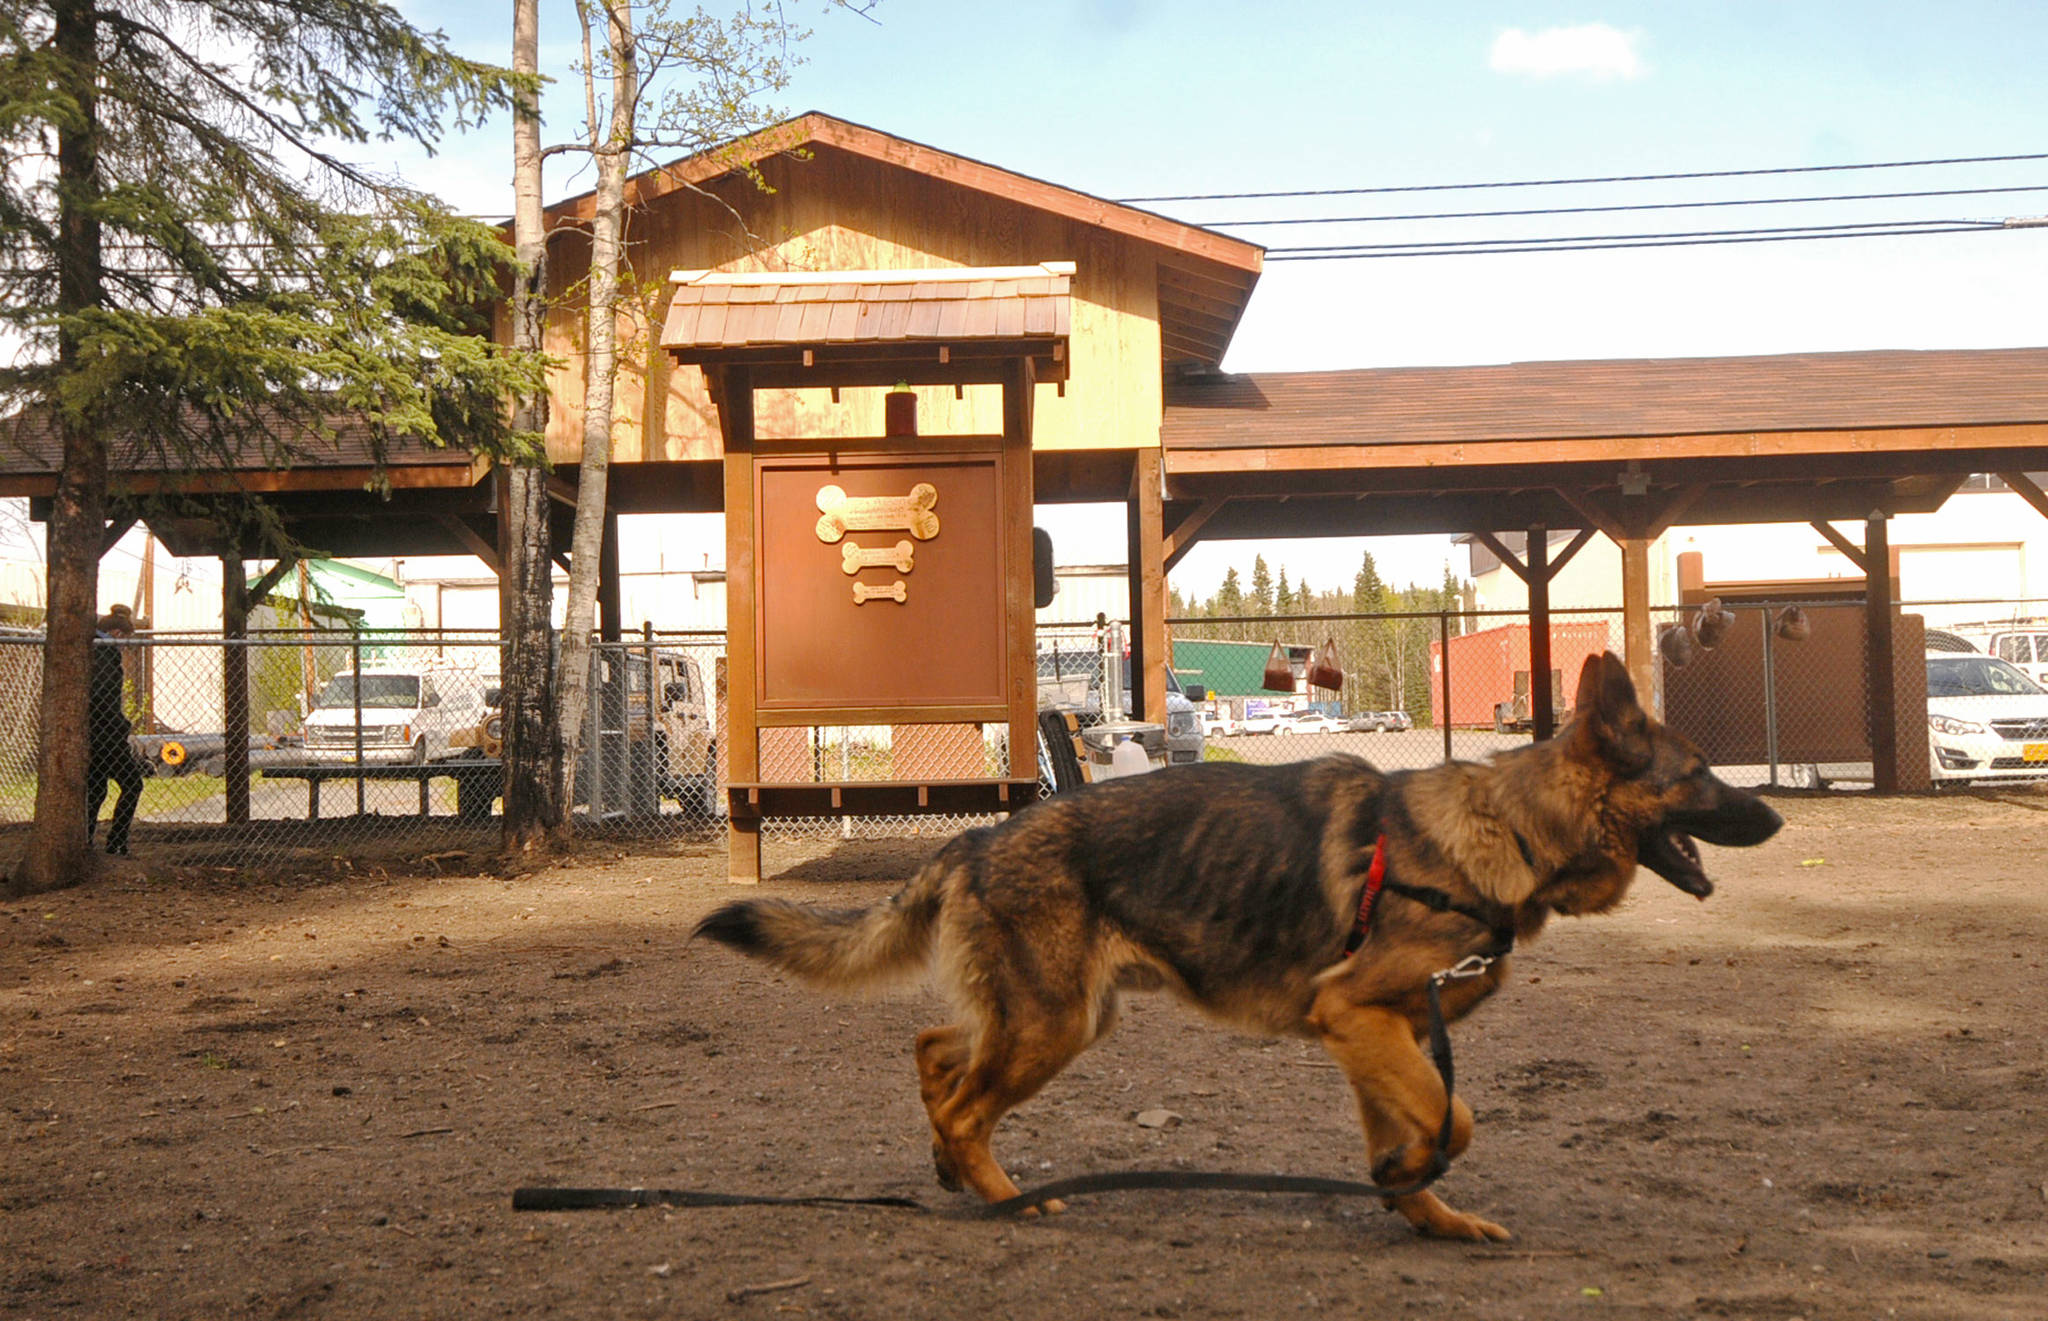 A dog trots in the 3 Friends Dog Park on Monday, May 21, 2018 in Soldotna, Alaska. (Photo by Elizabeth Earl/Peninsula Clarion)